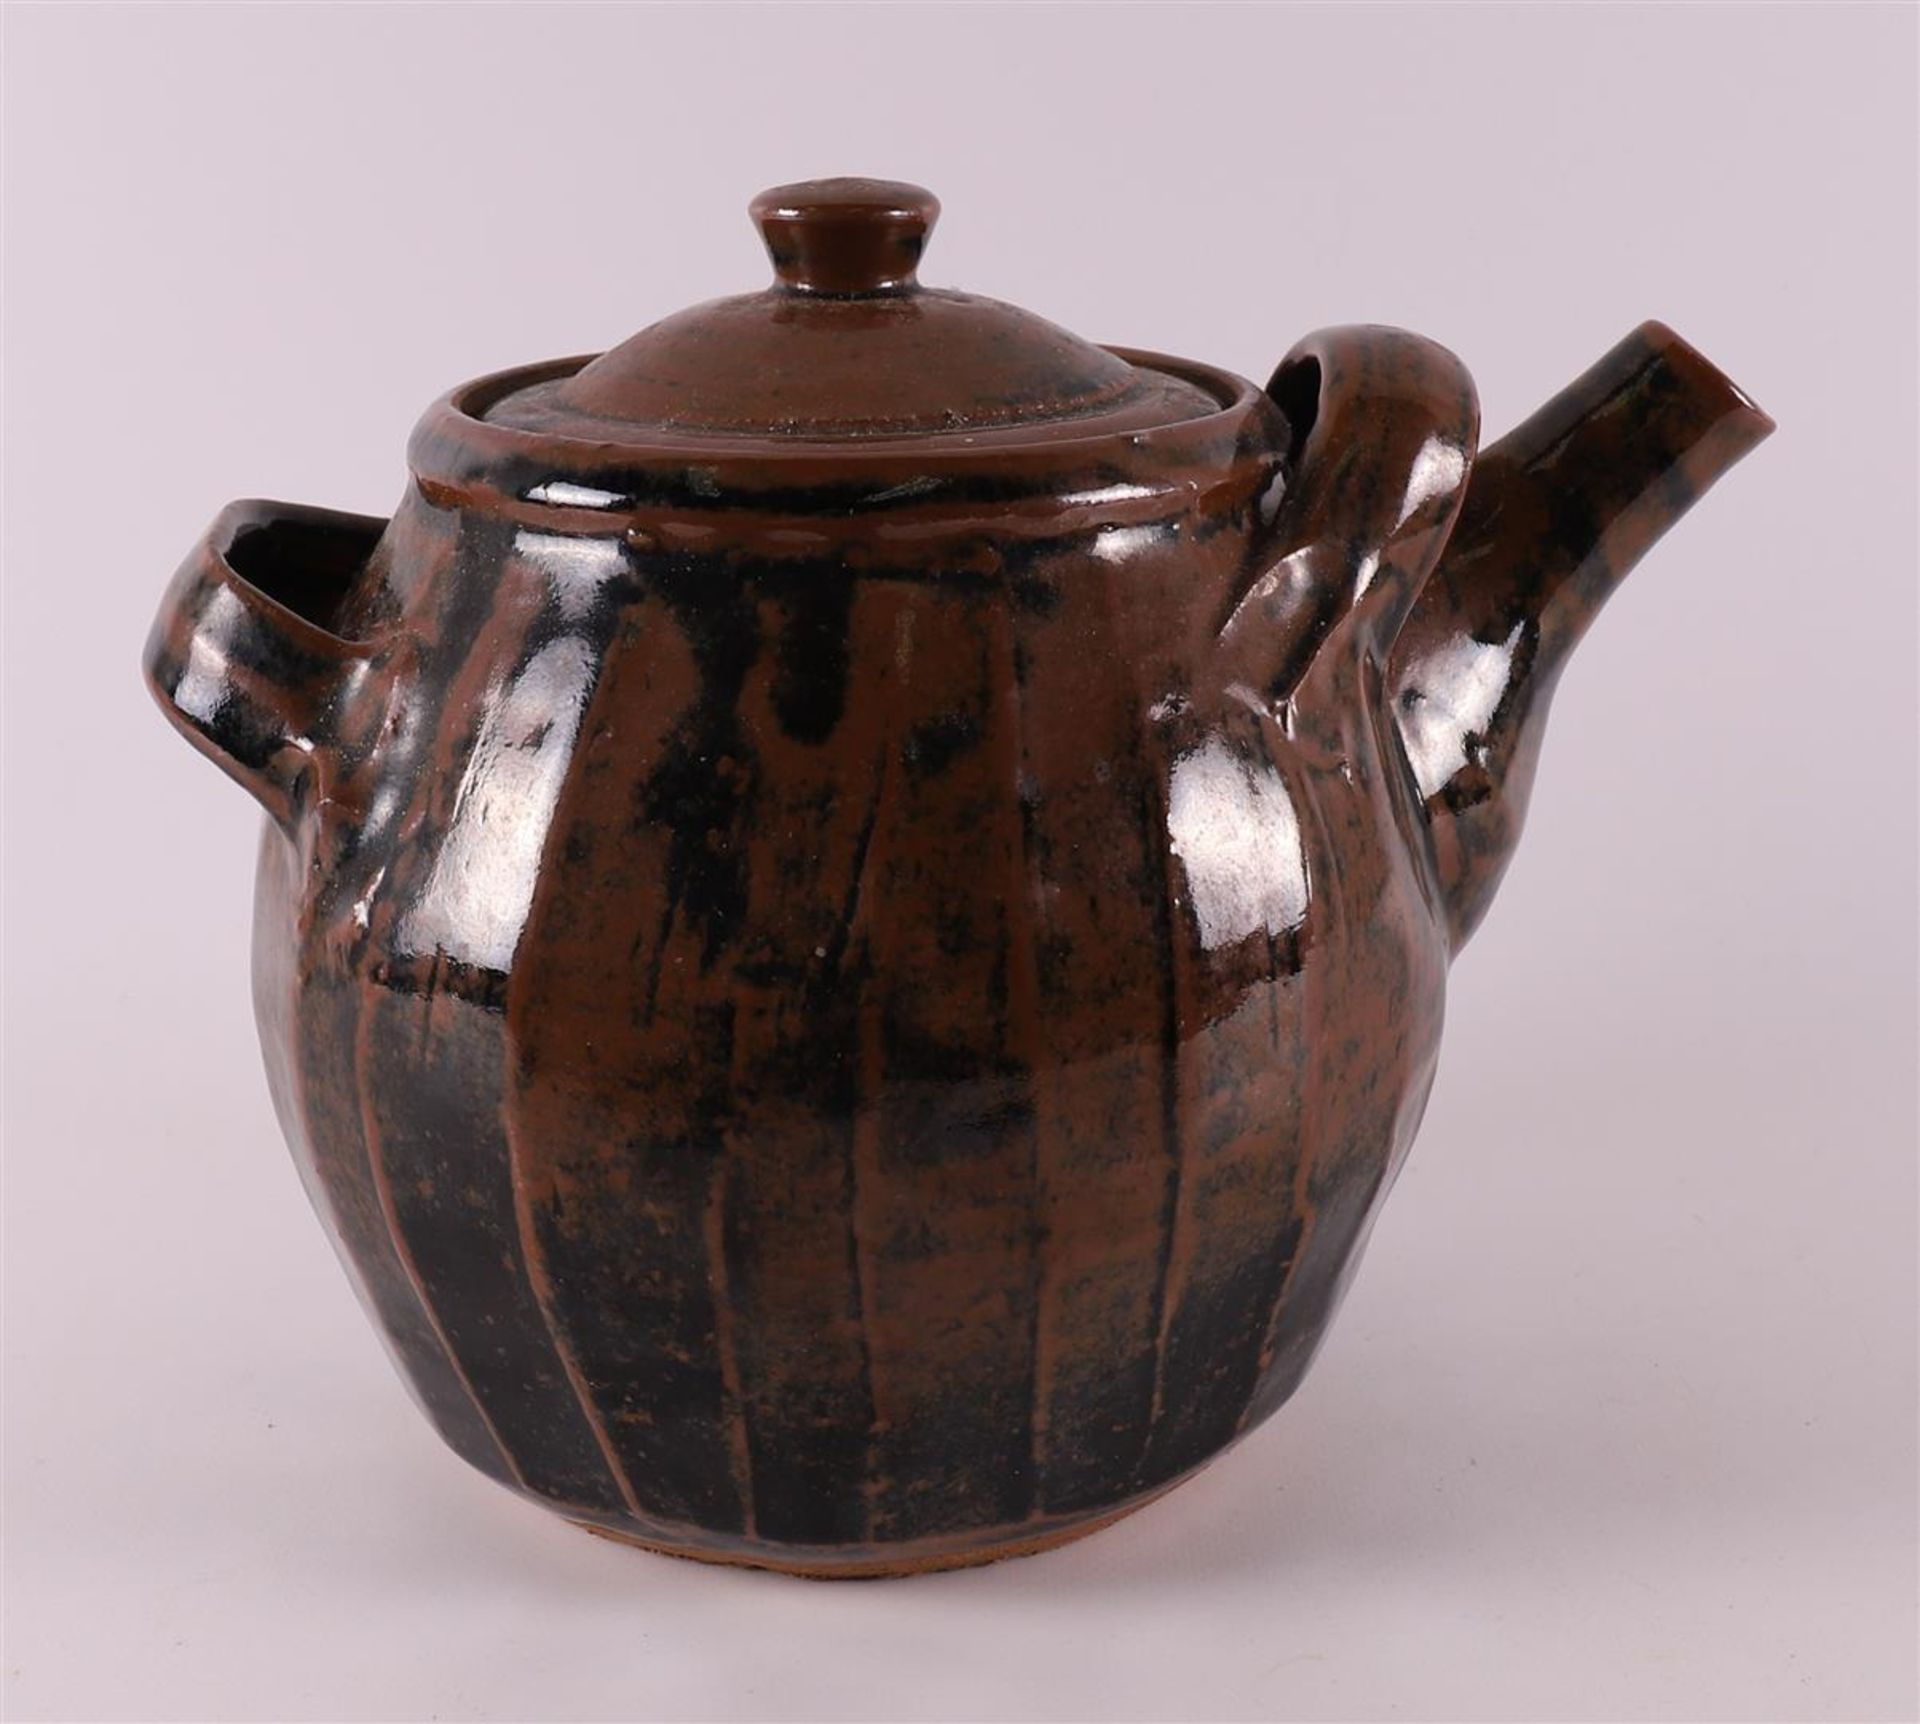 A brown glazed ceramic teapot, 2nd half of the 20th century. - Image 2 of 8